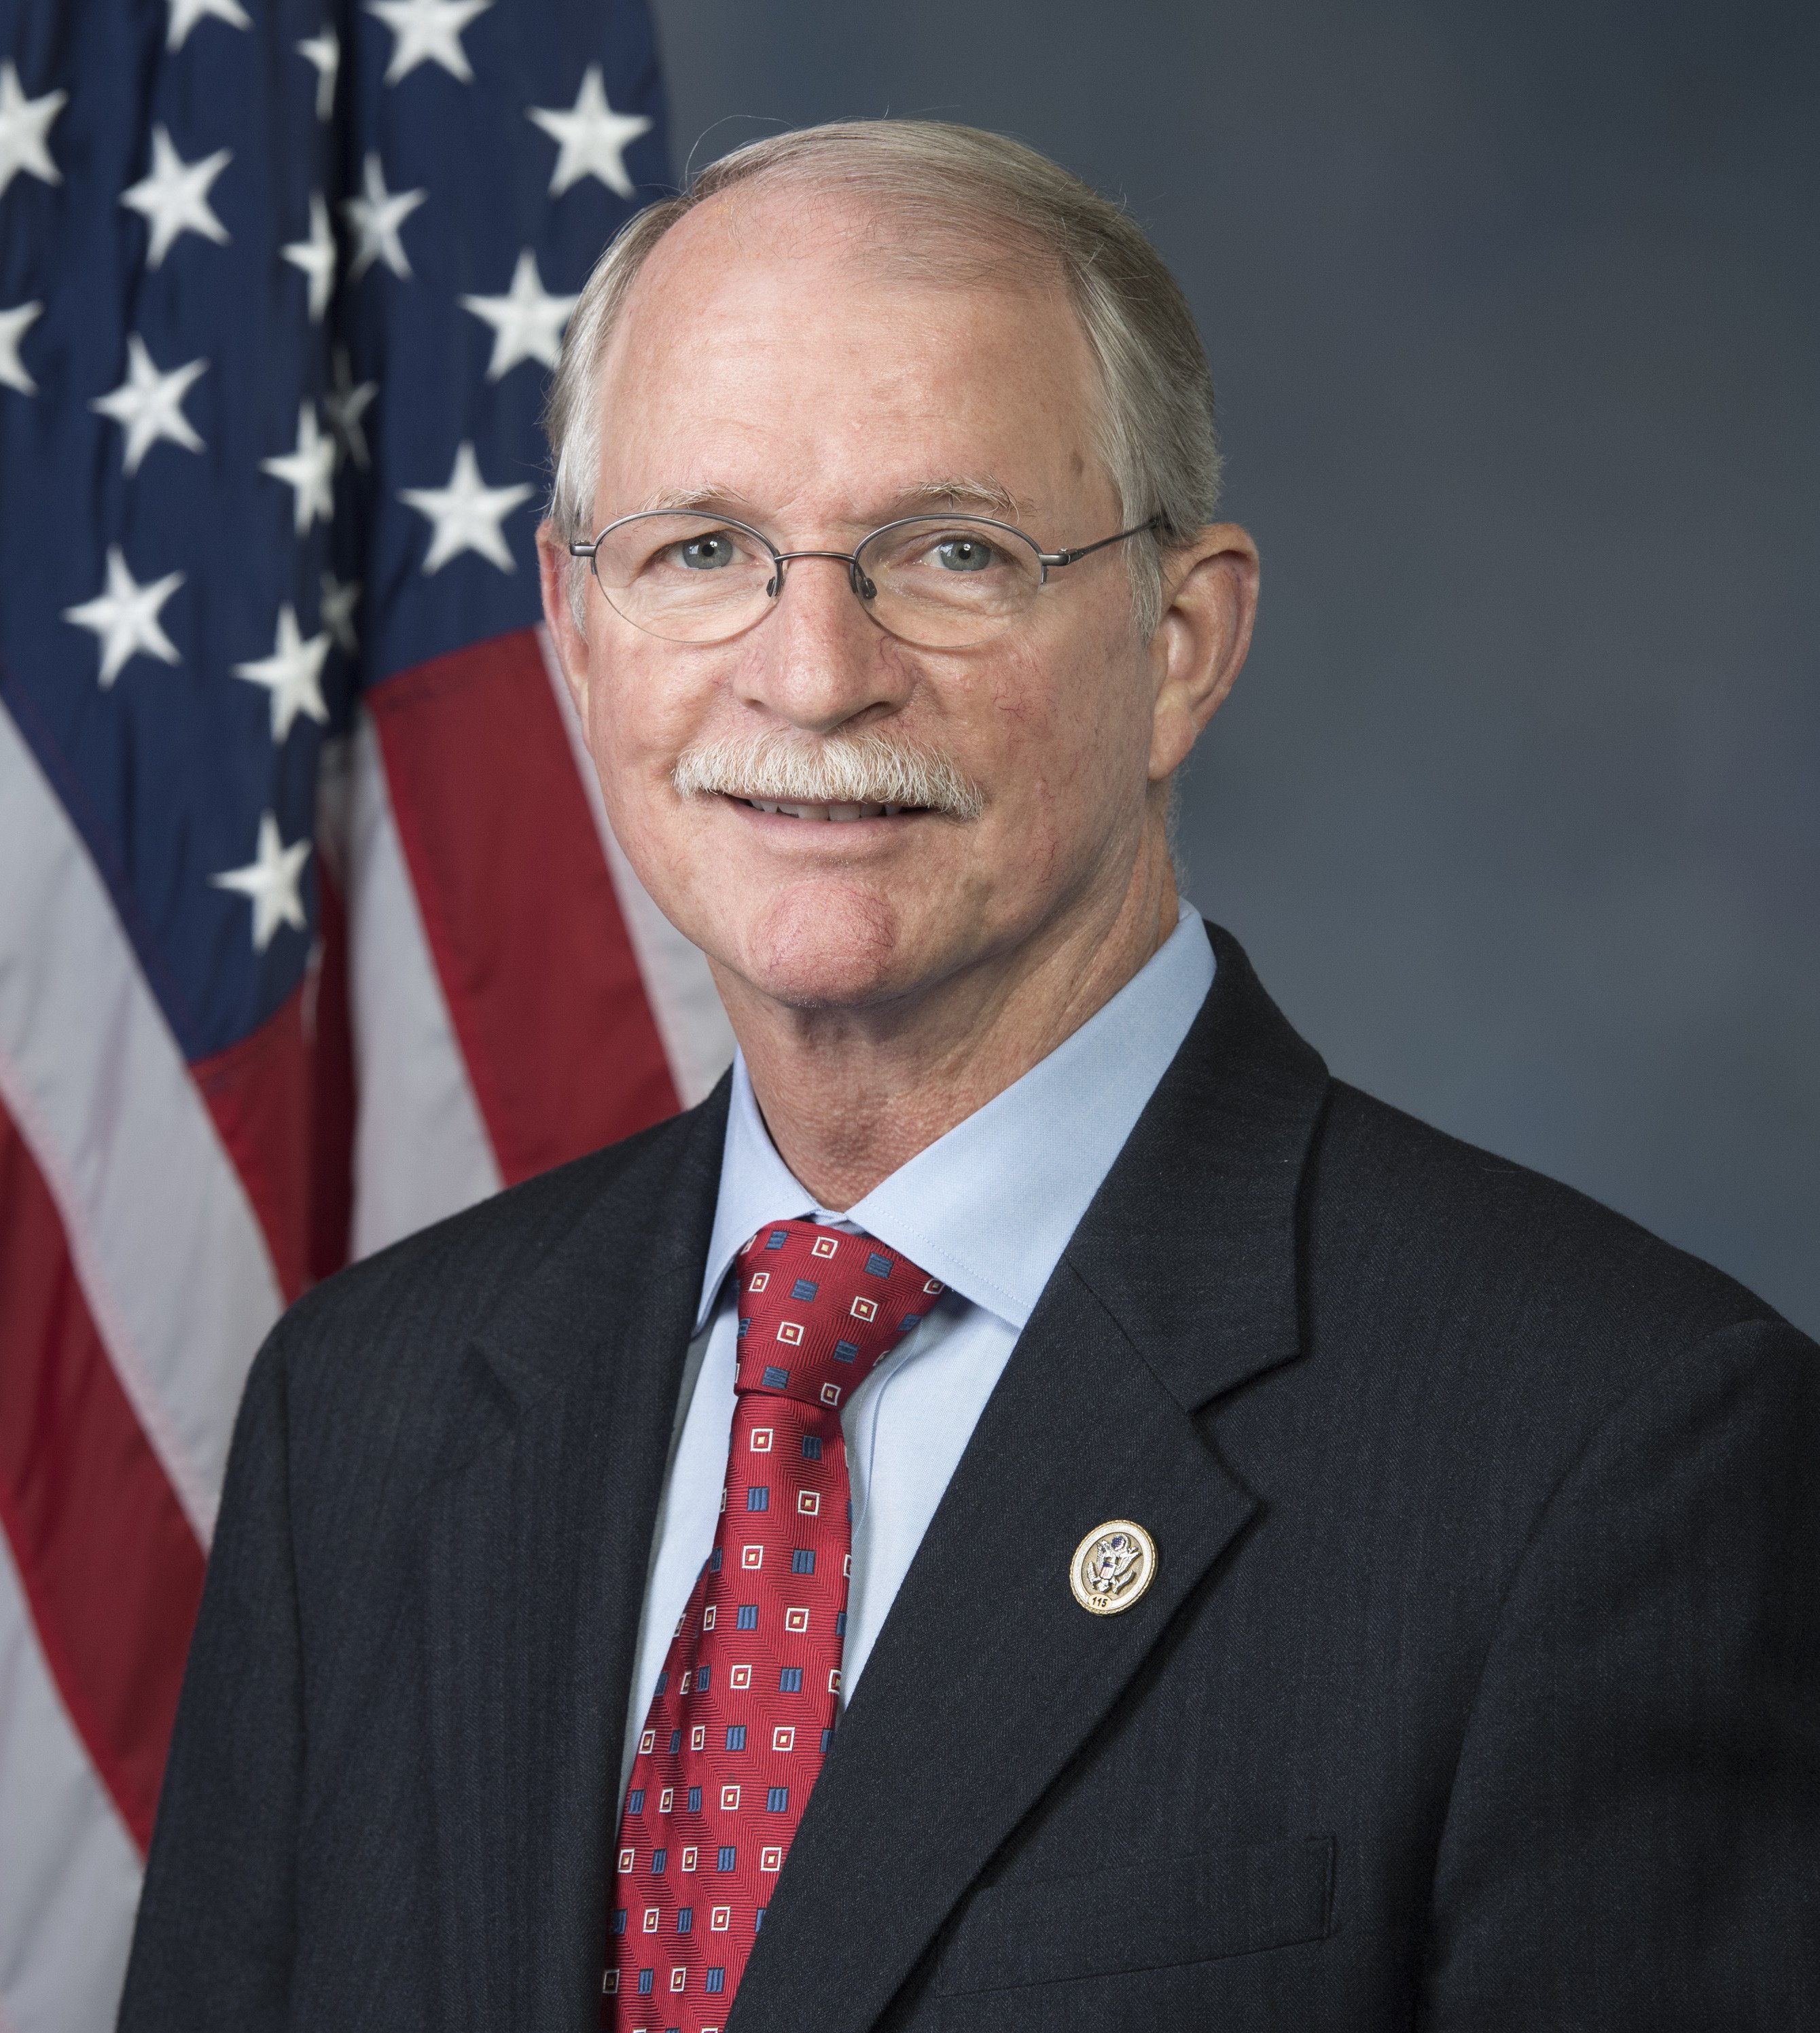 Rep Rutherford